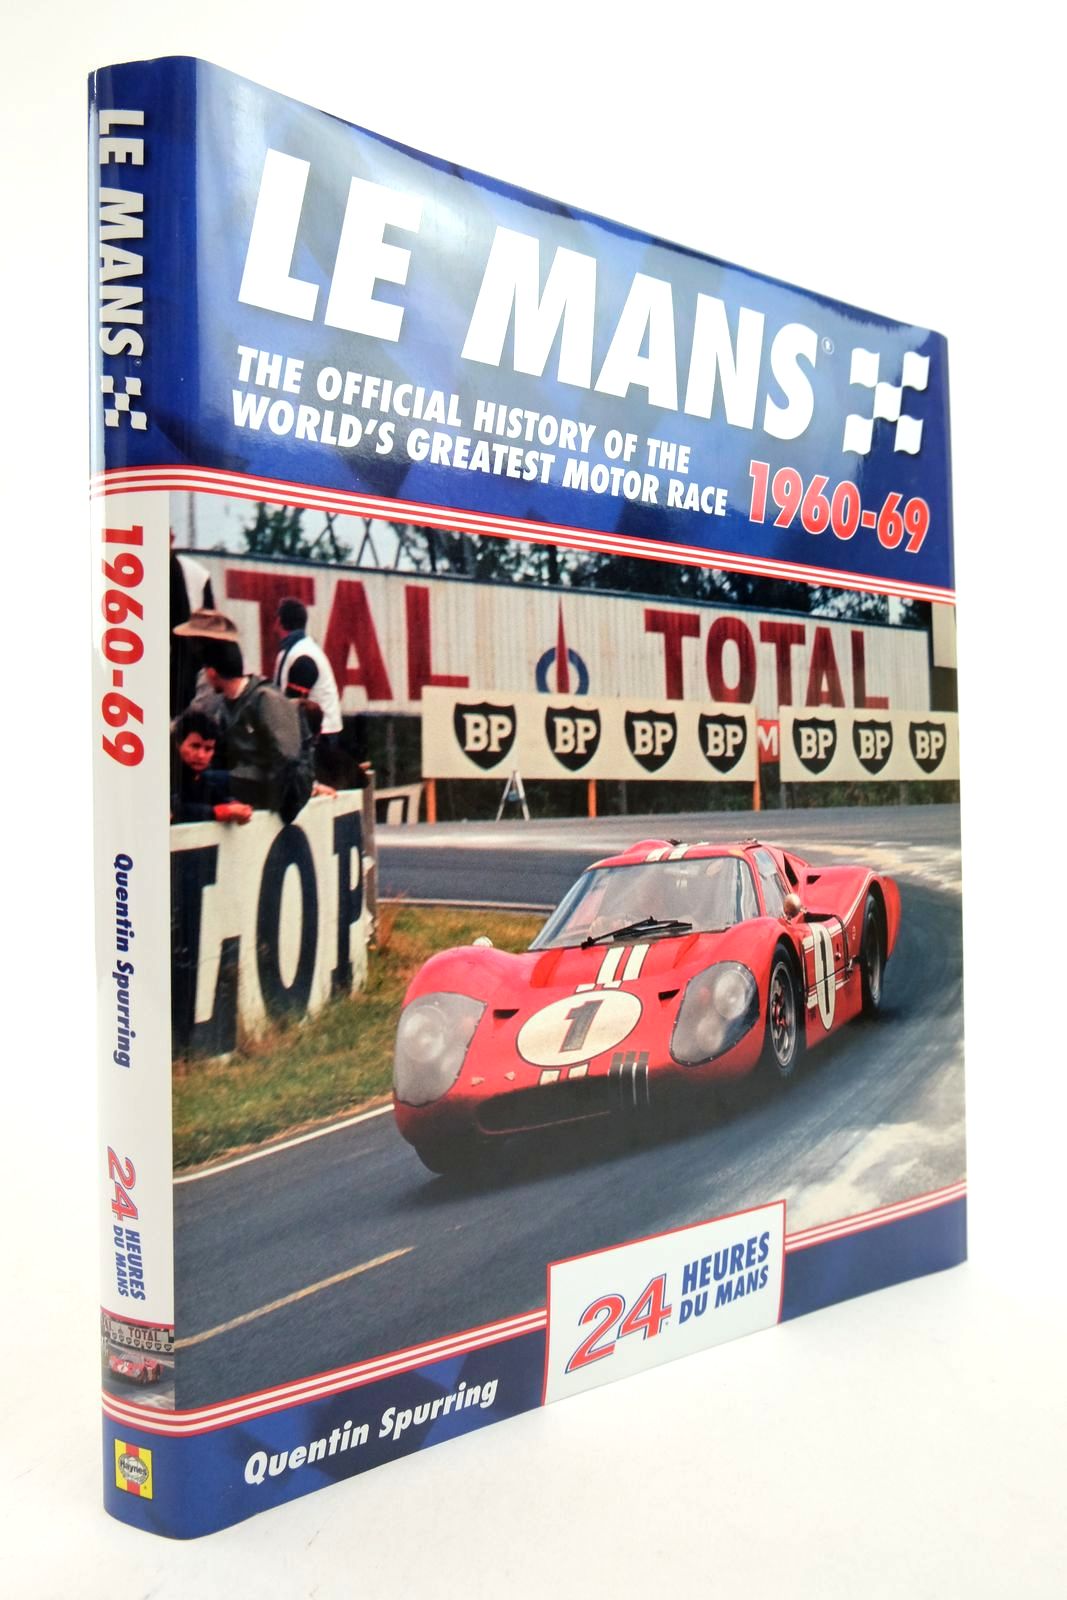 Photo of LE MANS 1960-69: THE OFFICIAL HISTORY OF THE WORLD'S GREATEST MOTOR RACE written by Spurring, Quentin published by Haynes (STOCK CODE: 2140145)  for sale by Stella & Rose's Books